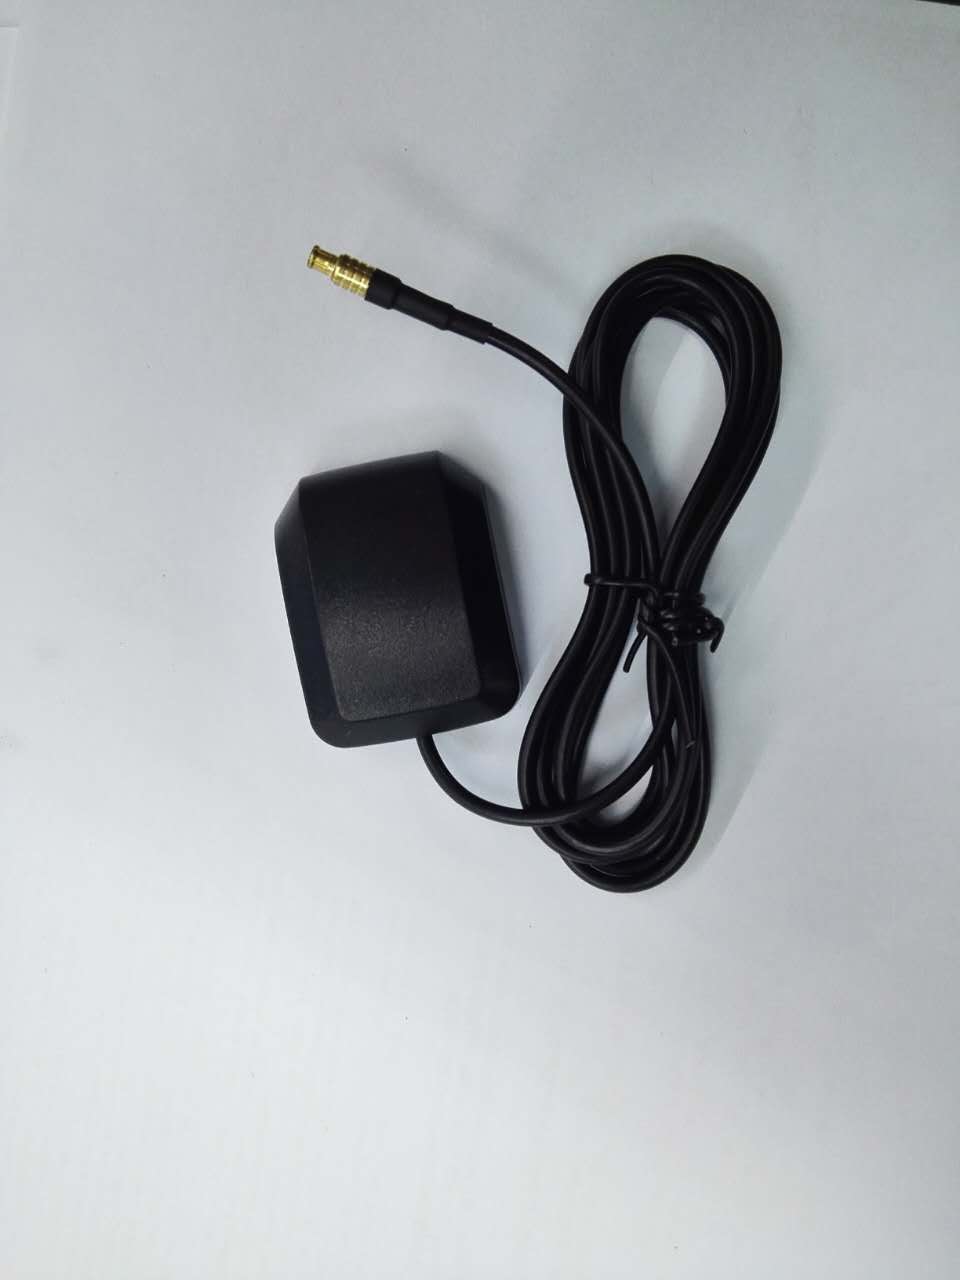 MCX GPS Antenna Active Amplifier 3 Metres Cable With Mag-Mount